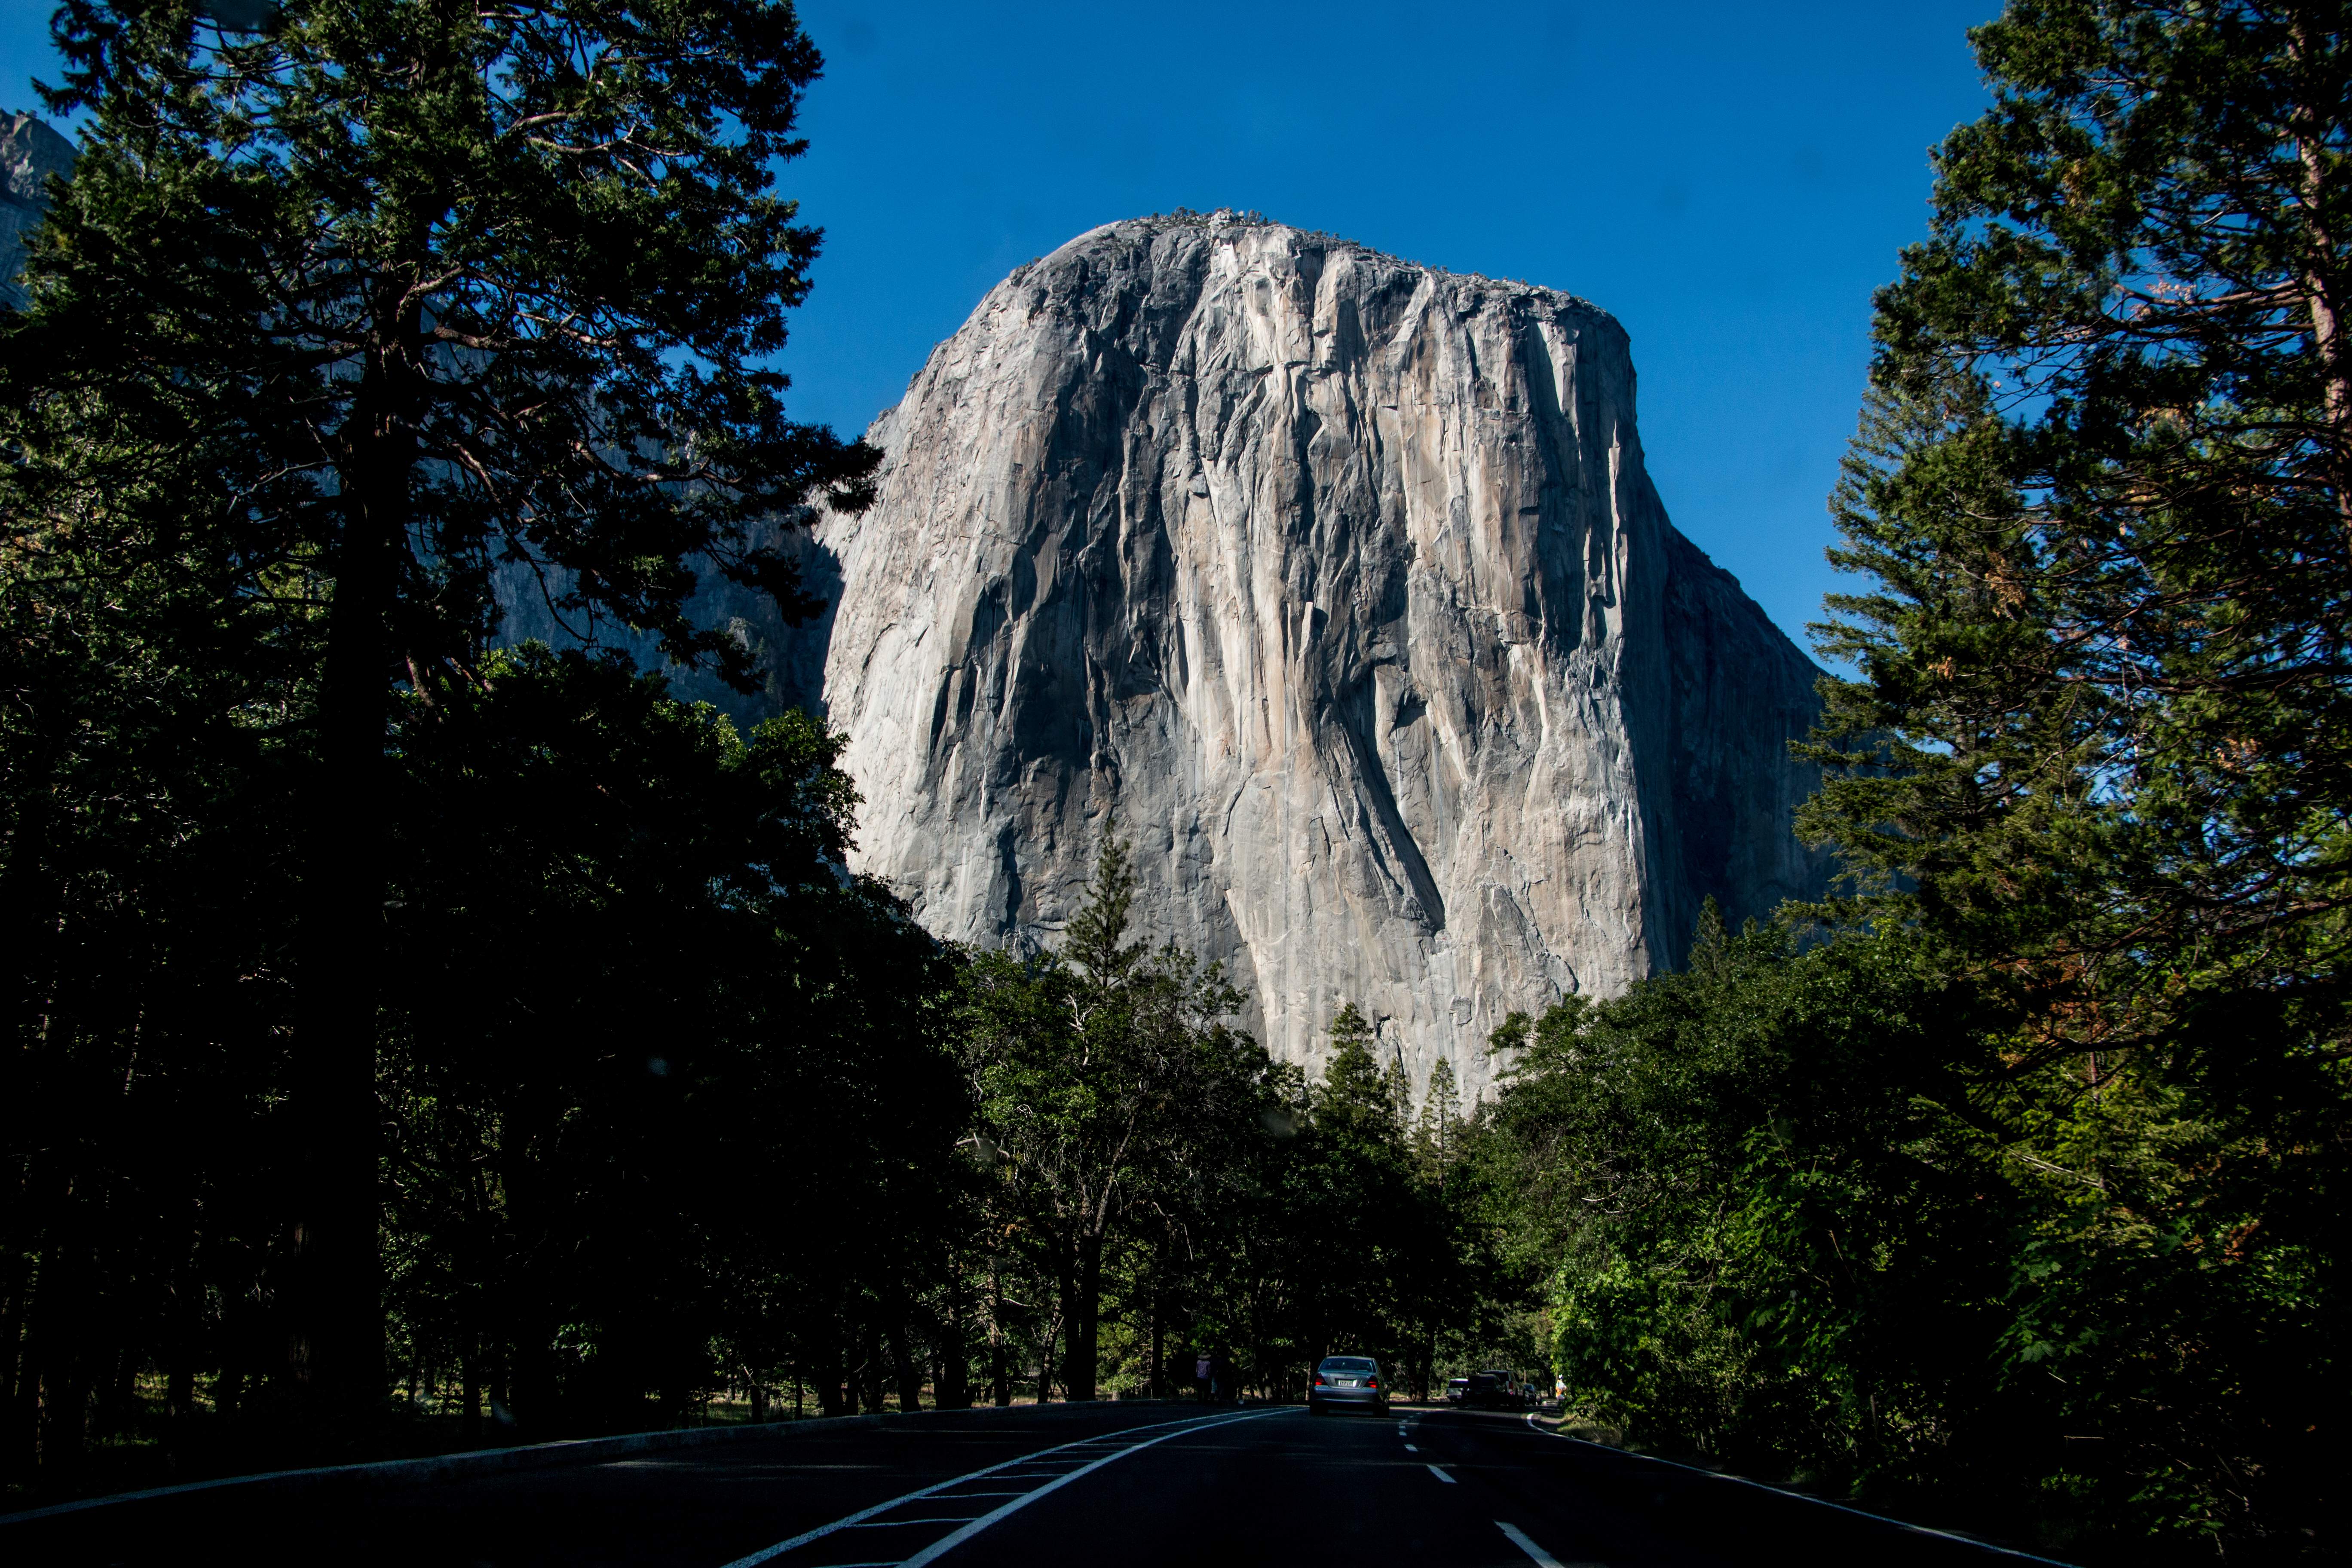 A Giant Rock from Yosemite